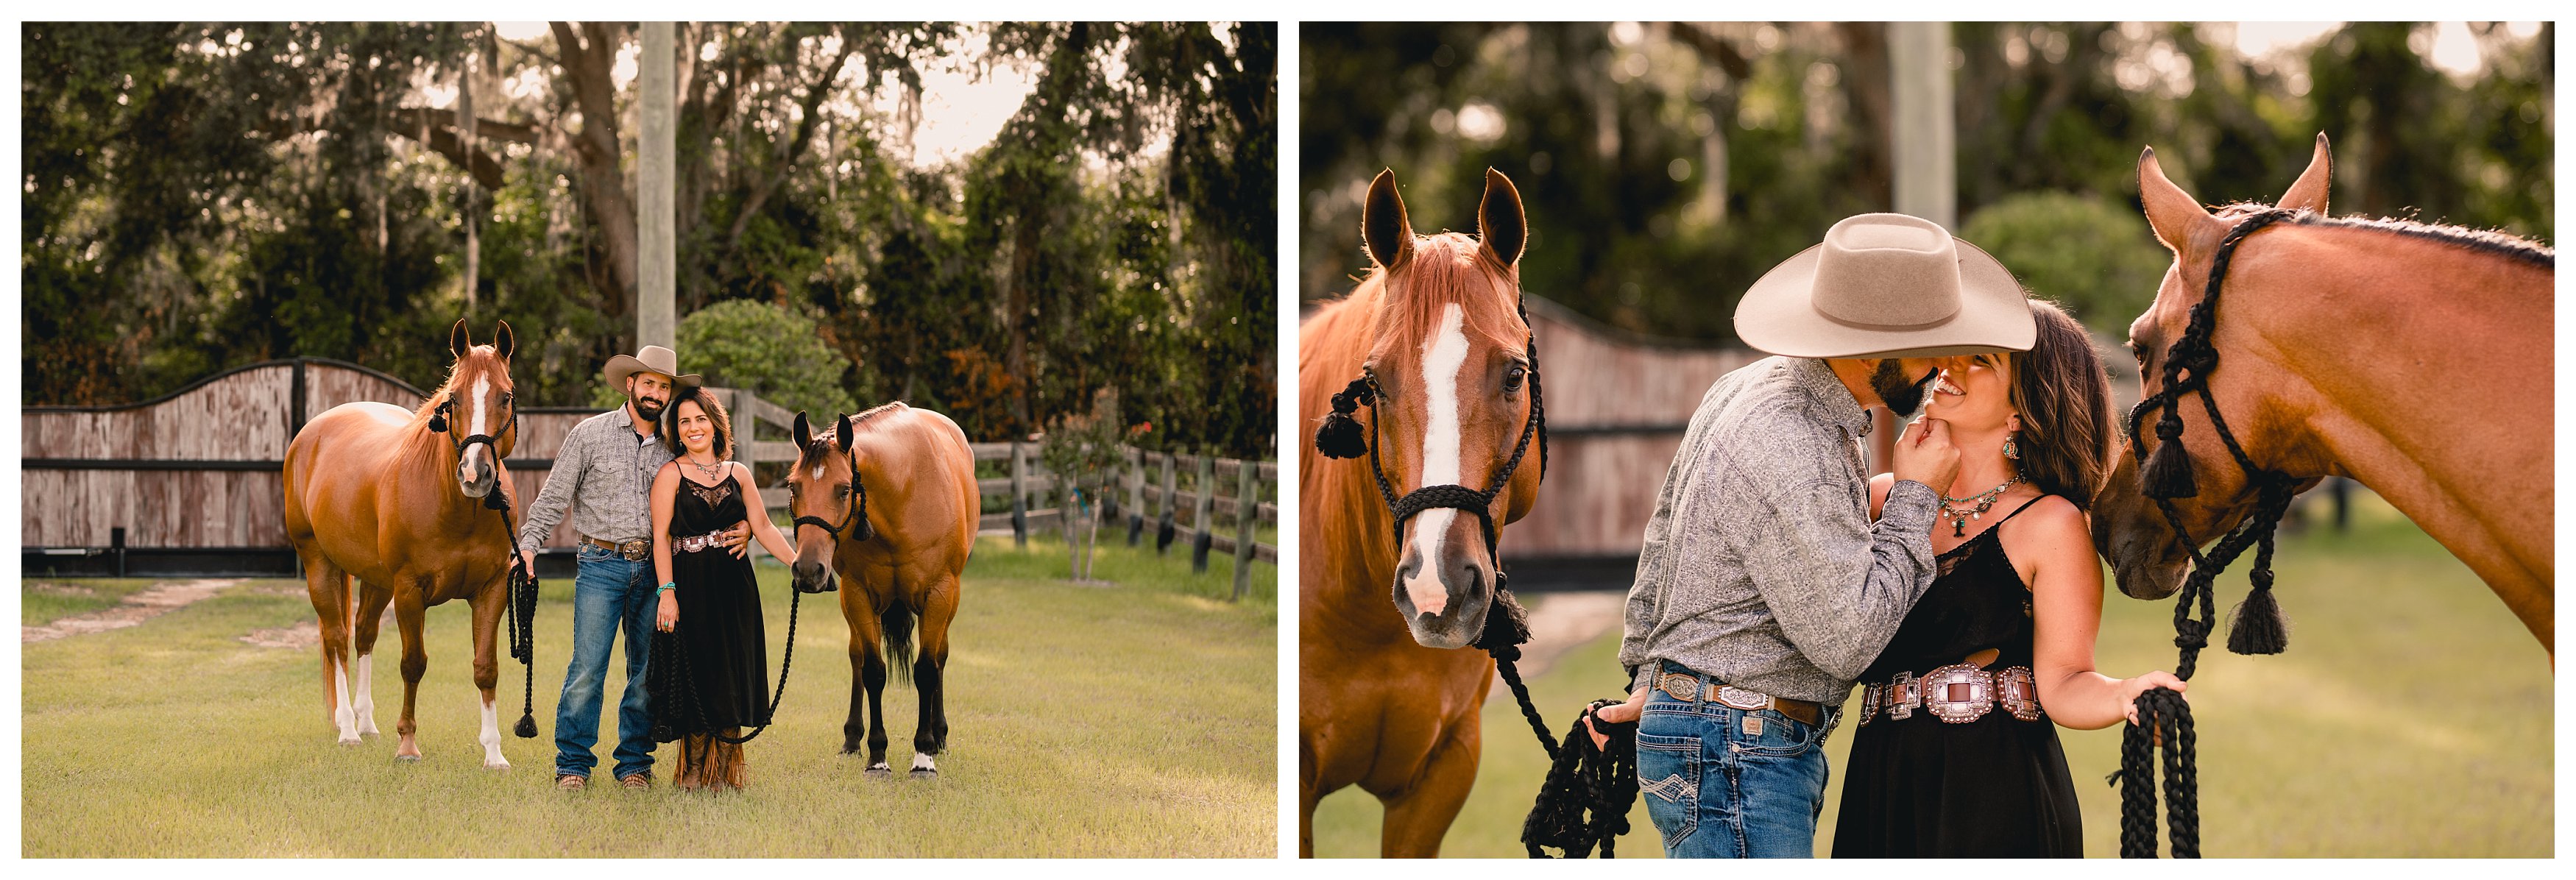 Western couple photoshoot with two horses during the golden hour in Ocala, FL.